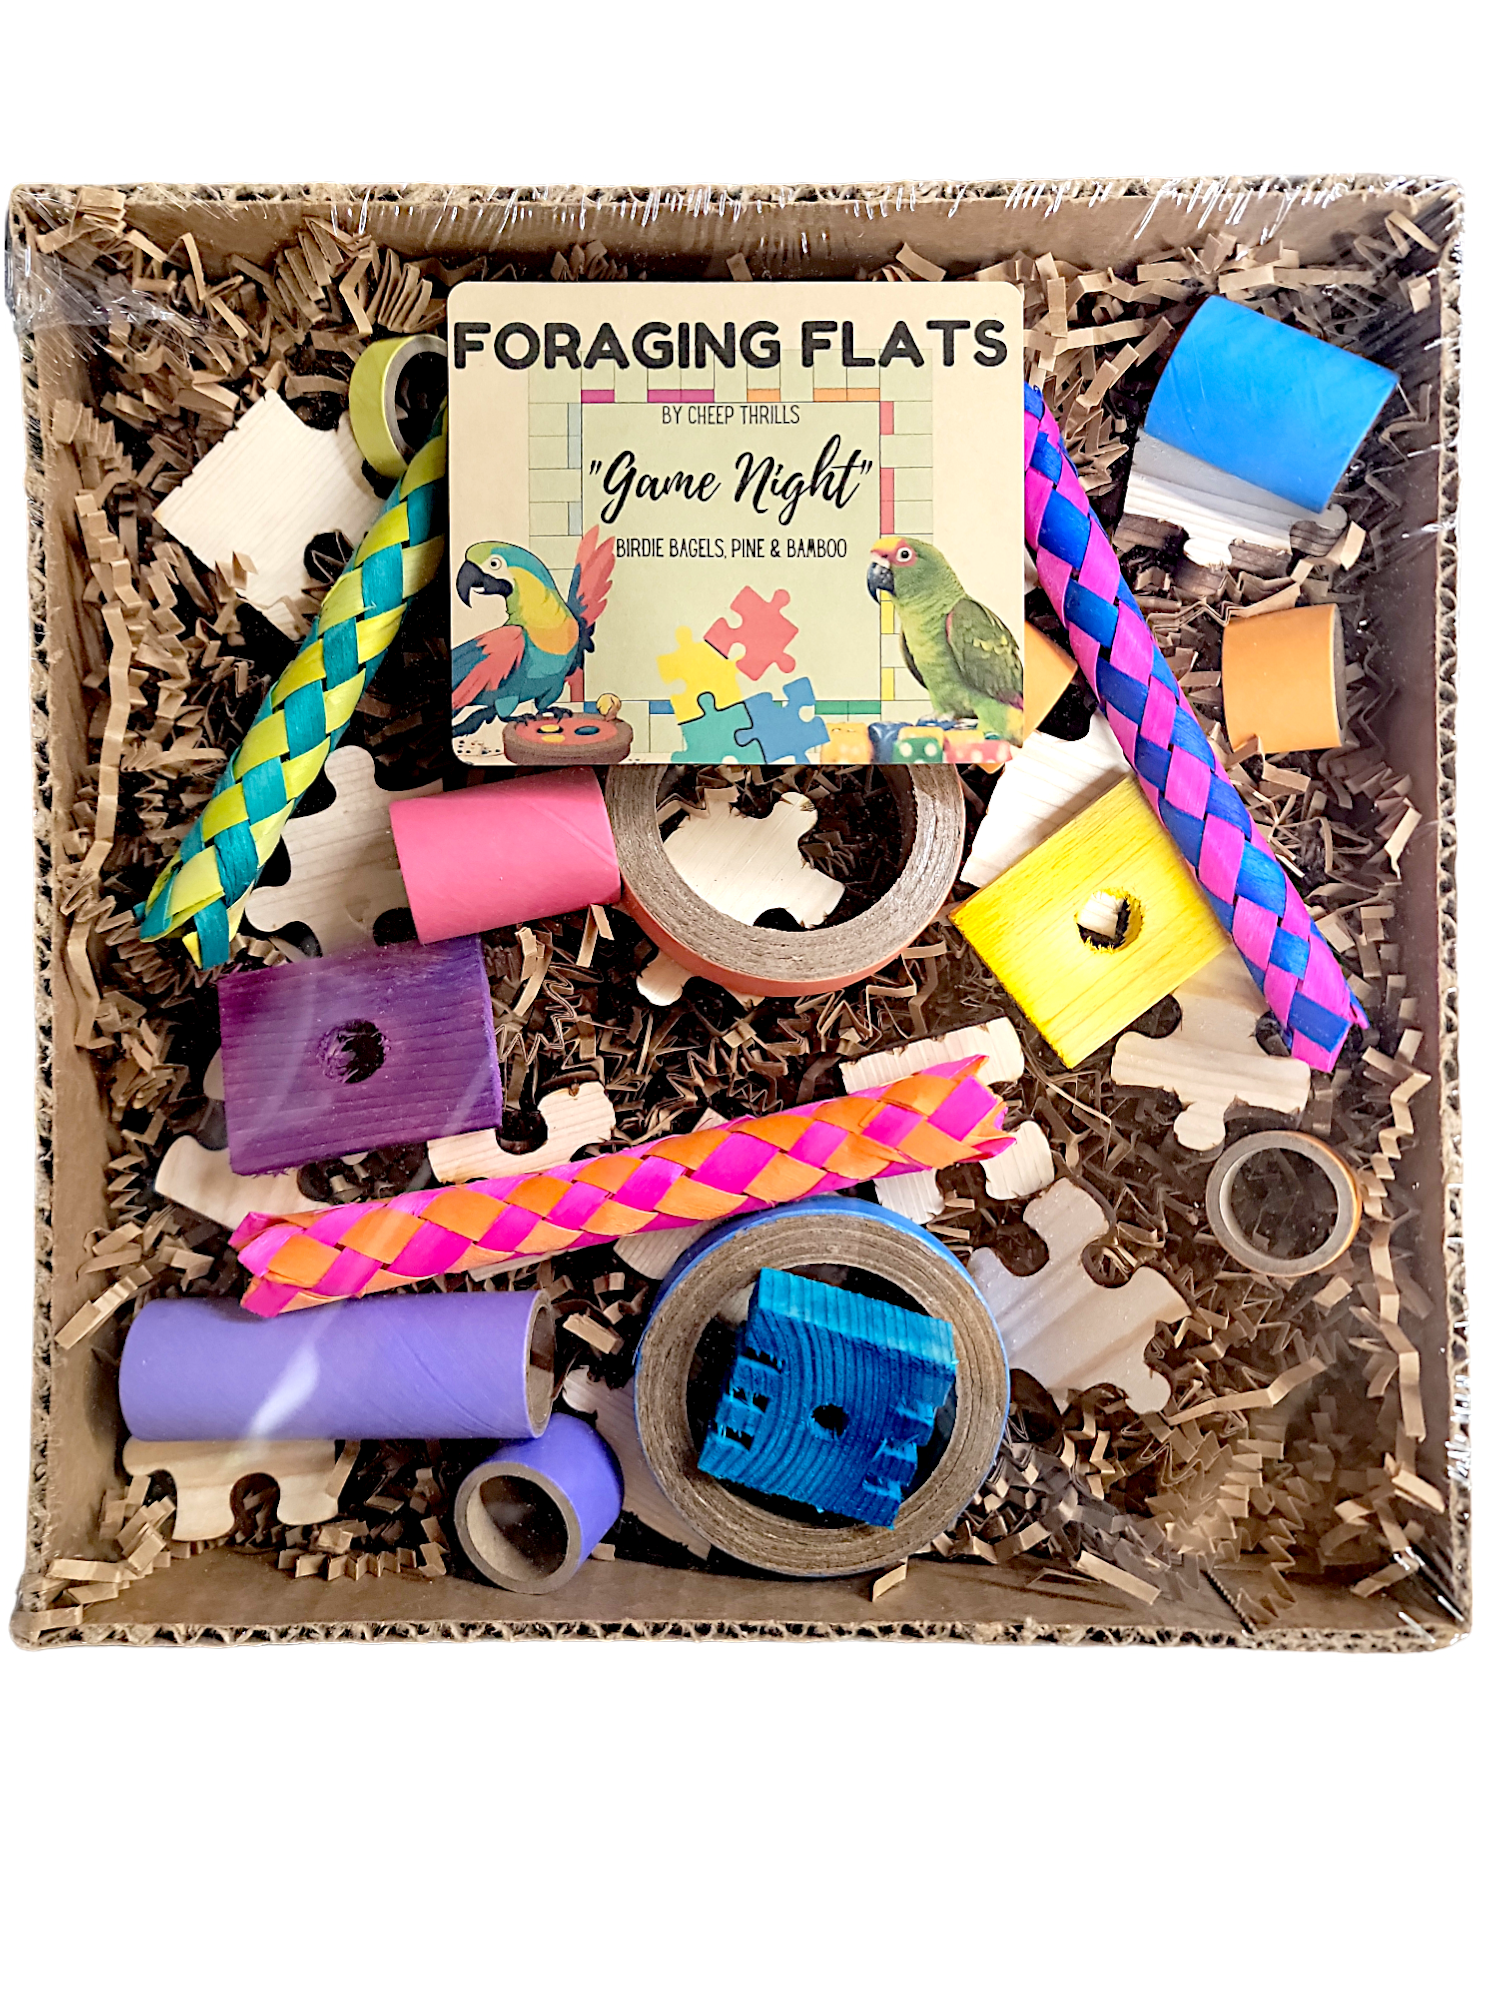 "BYOT" Foraging Flats by Cheep Thrills